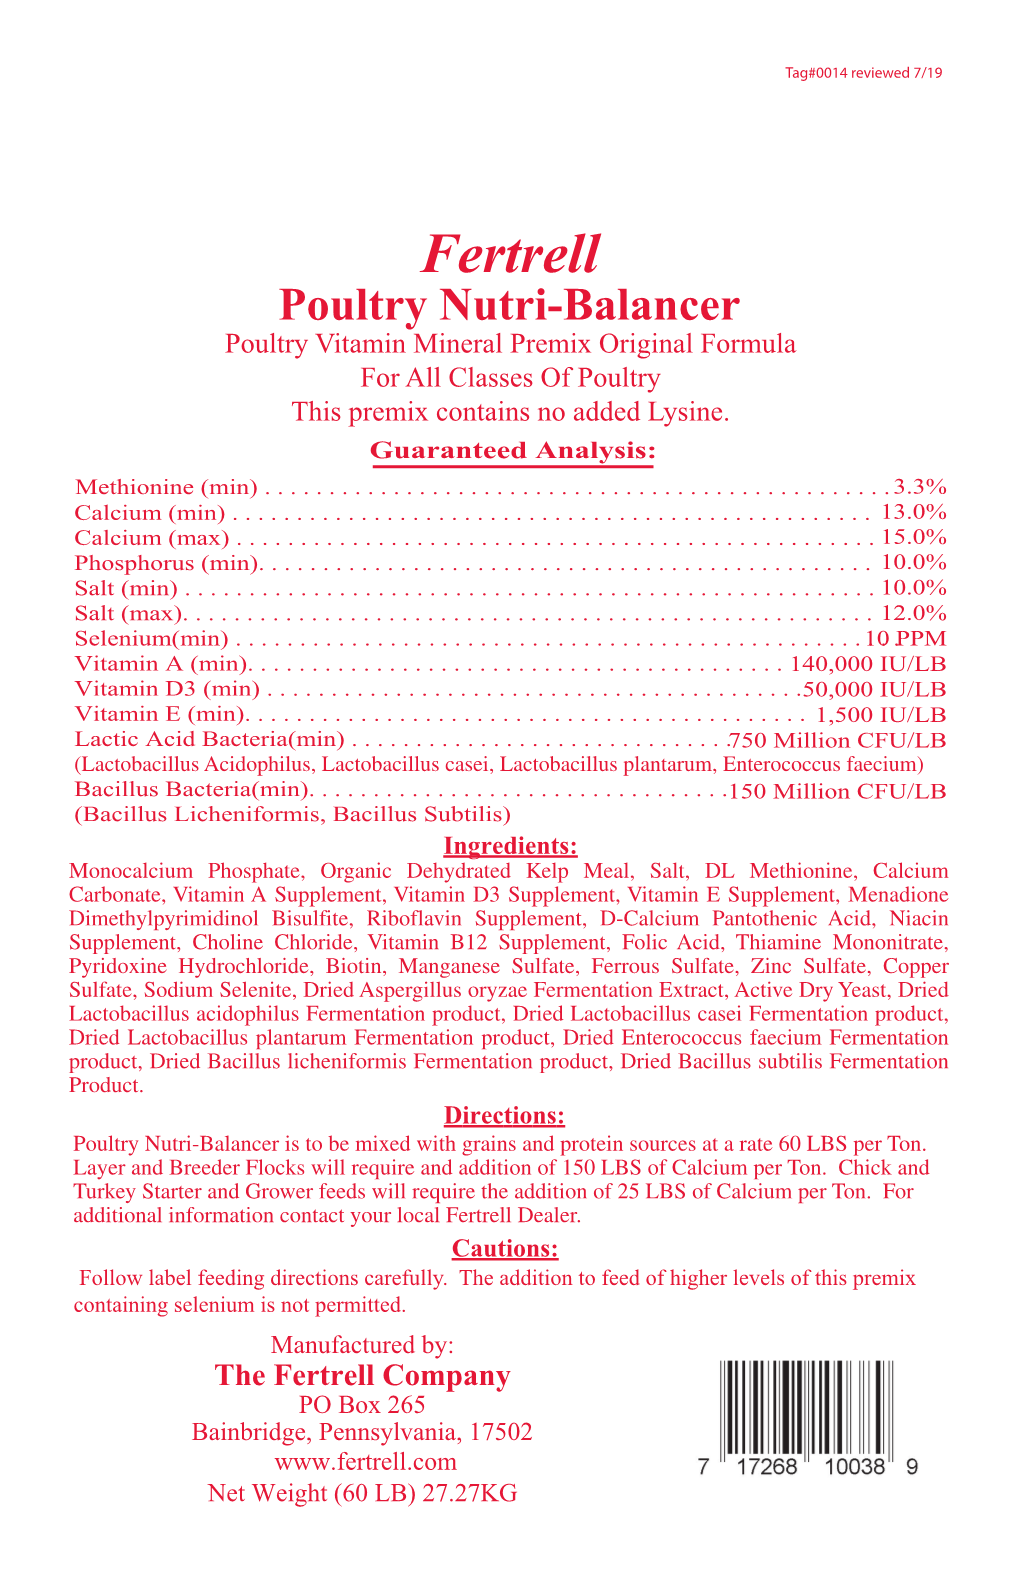 Fertrell Poultry Nutri-Balancer Poultry Vitamin Mineral Premix Original Formula for All Classes of Poultry This Premix Contains No Added Lysine